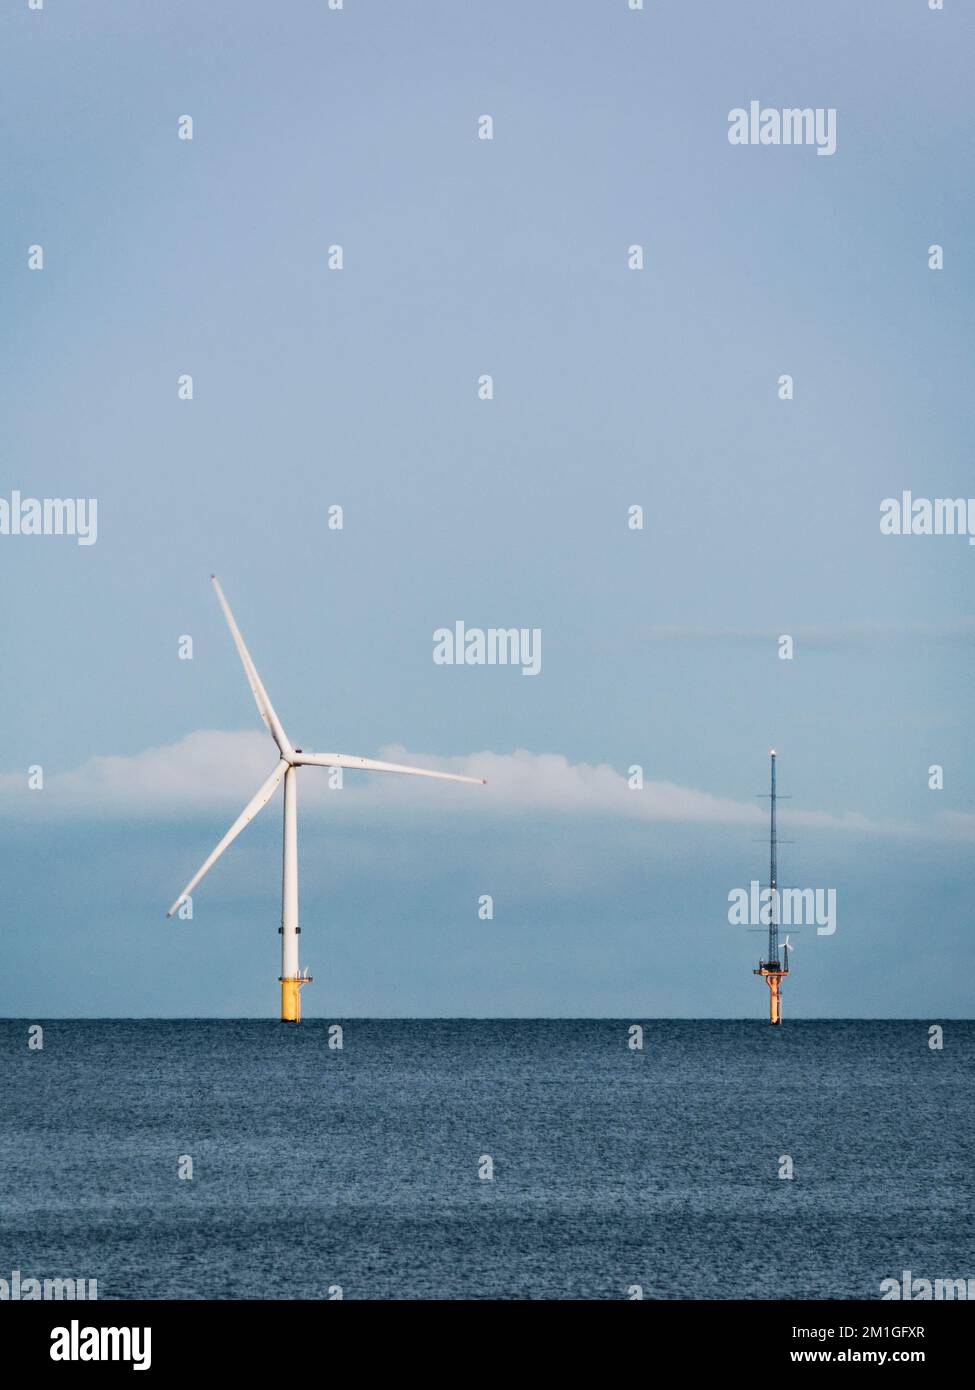 Offshore wind farm in the North Sea off Blyth, Northumberland, UK with turbine and turbine base. Stock Photo